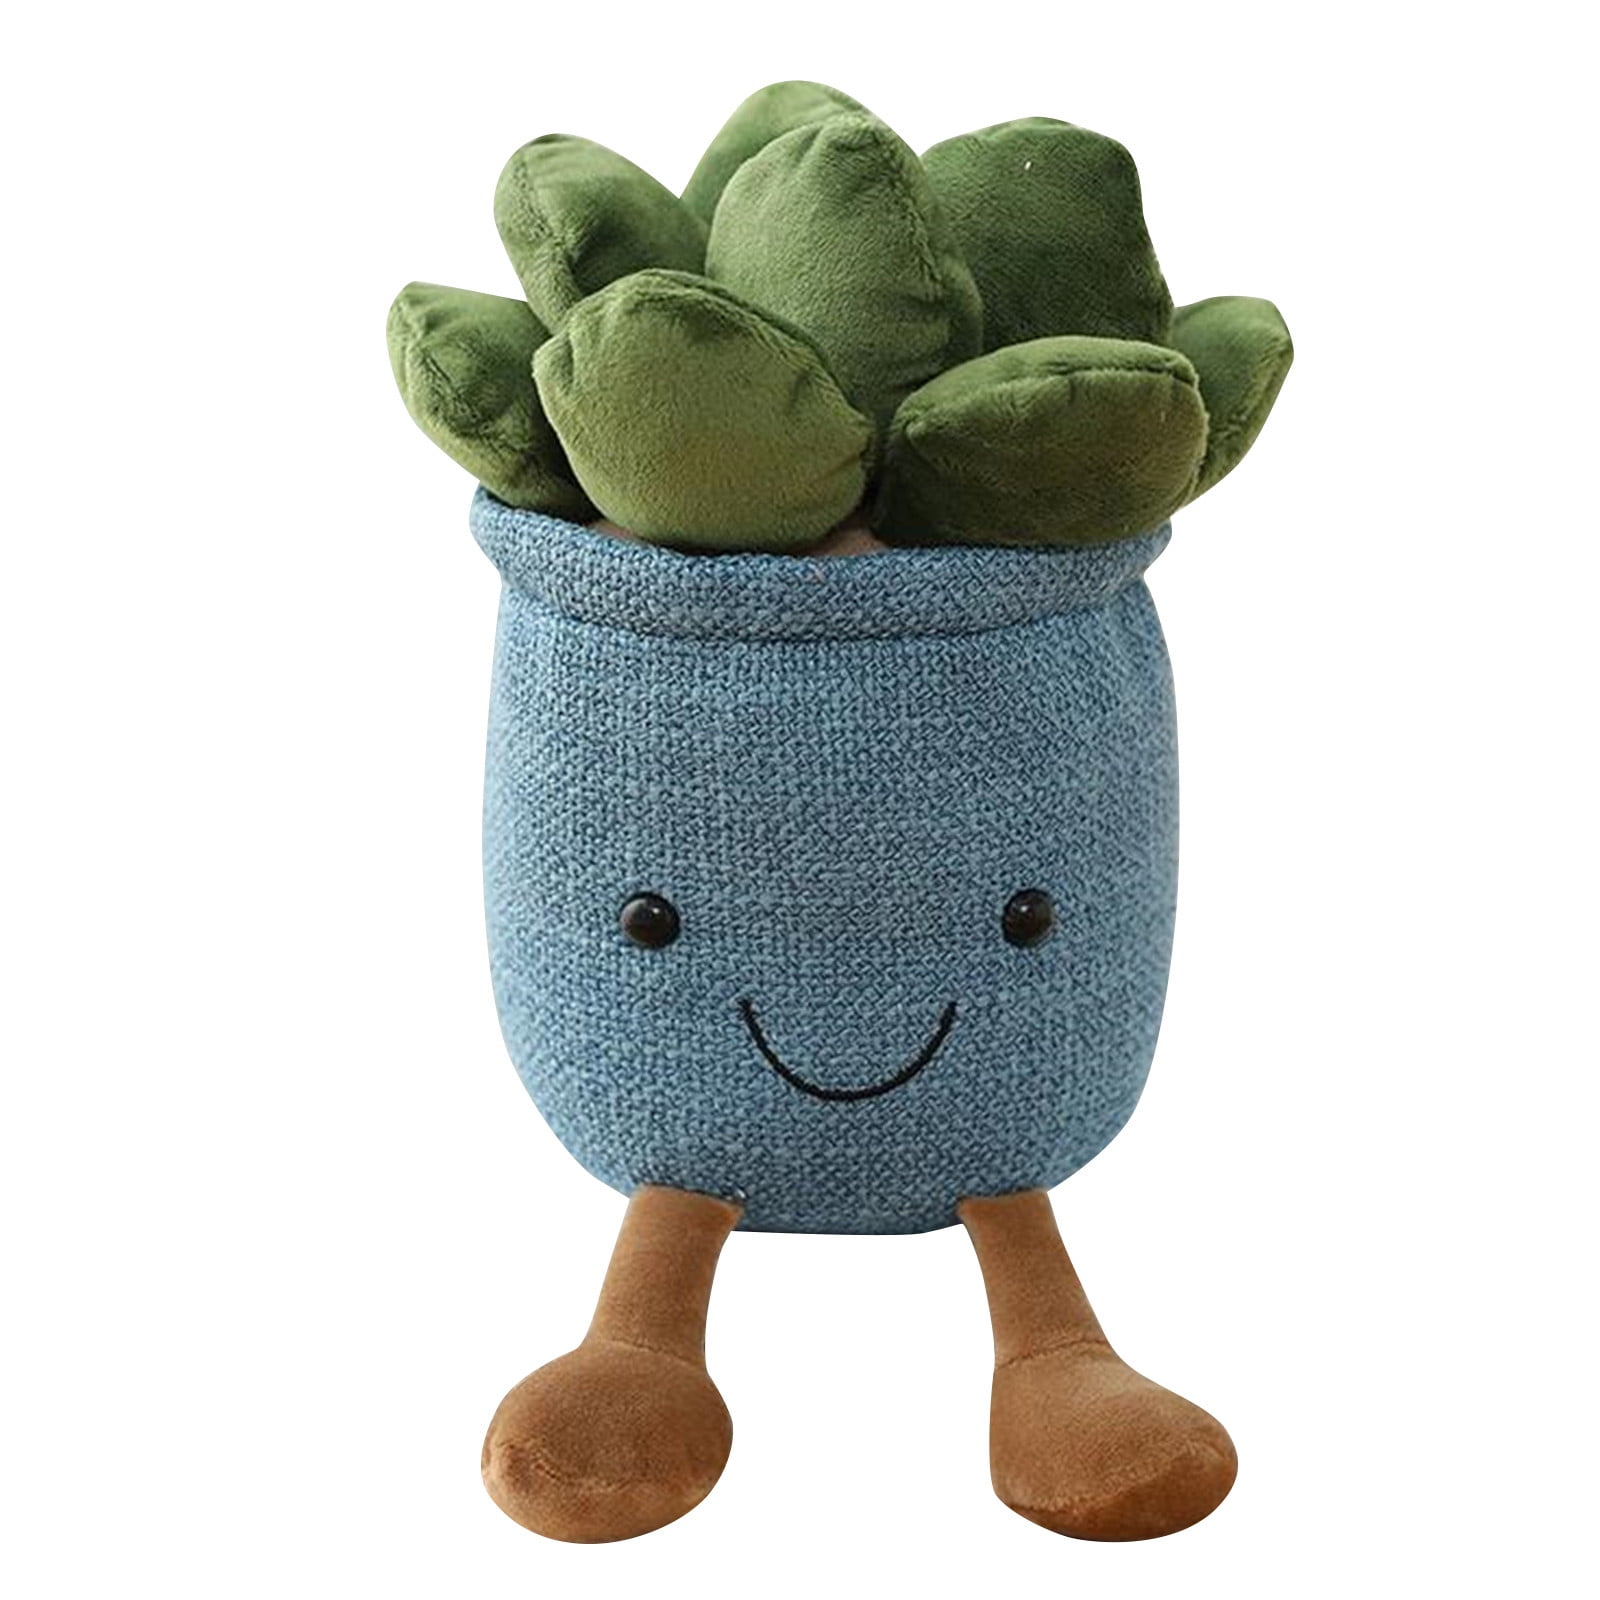 Soft Stuffed Plant Animal Toy Adorable Gift Decoration for Home Decor Plant Succulent Plush Toys 9 inch Succulent Plush Pillow Cute Potted Plants Plushies 